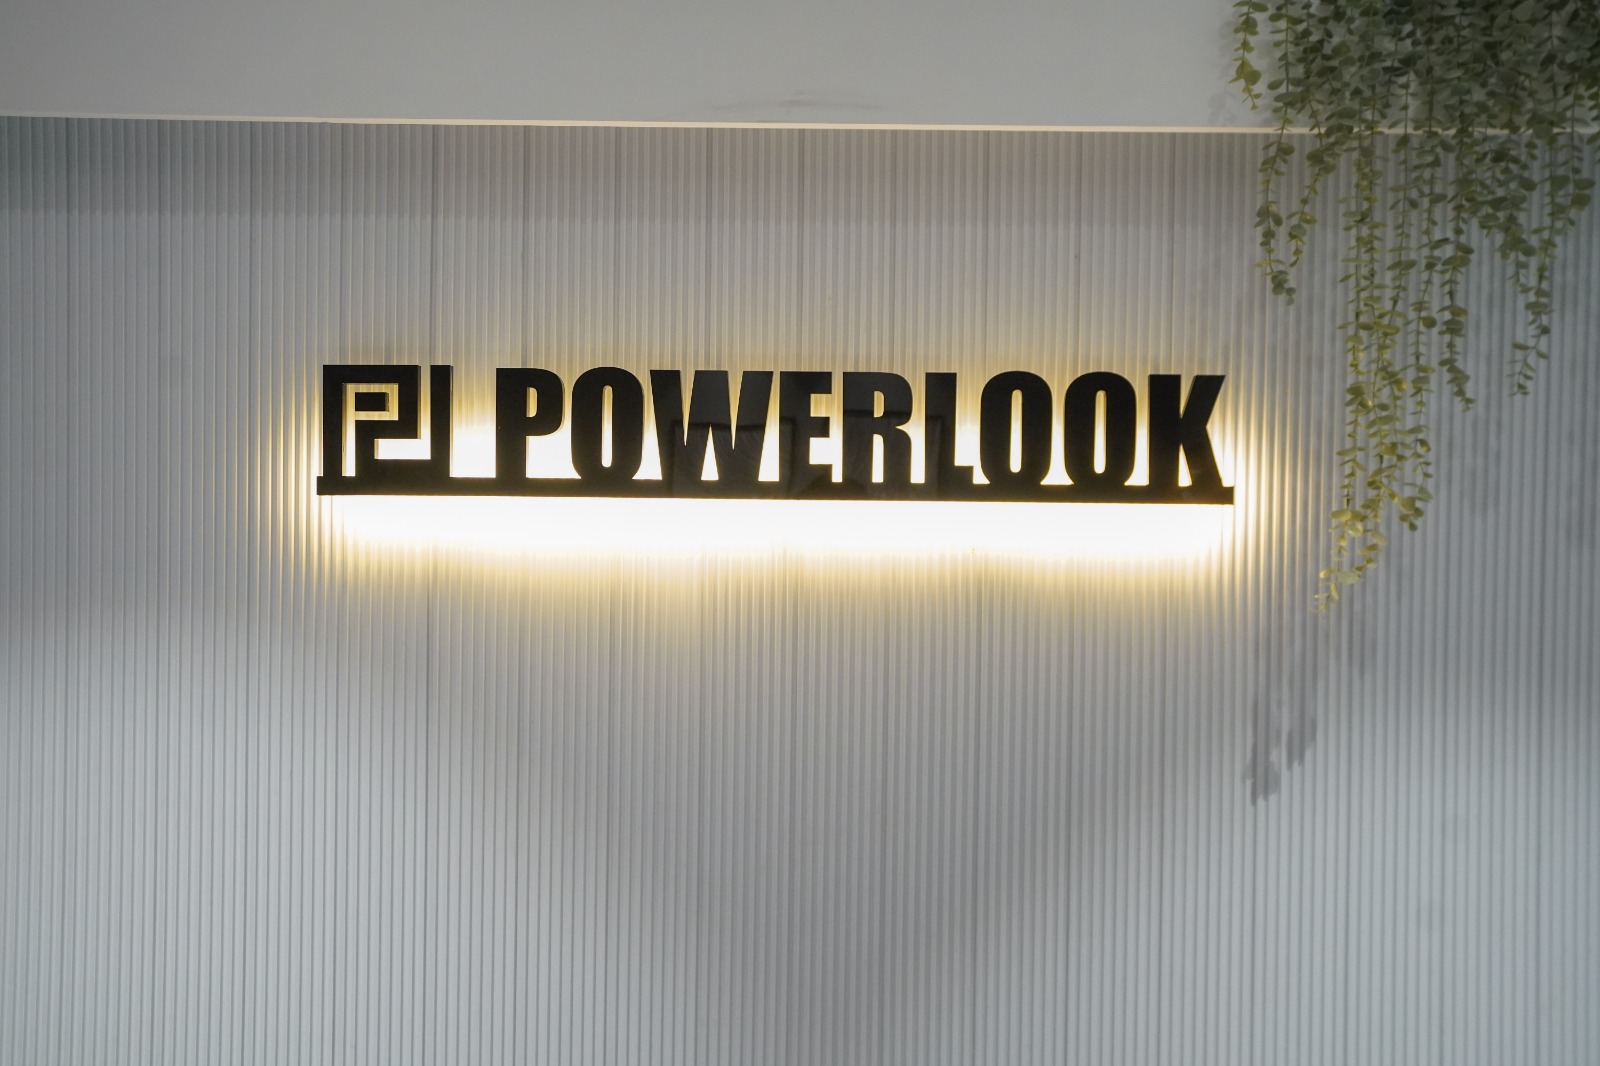 Powerlook Sets New Trend with Grand Opening of State-of-the-Art Headquarters, Elevating Fast Fashion in Men's Clothing Industry